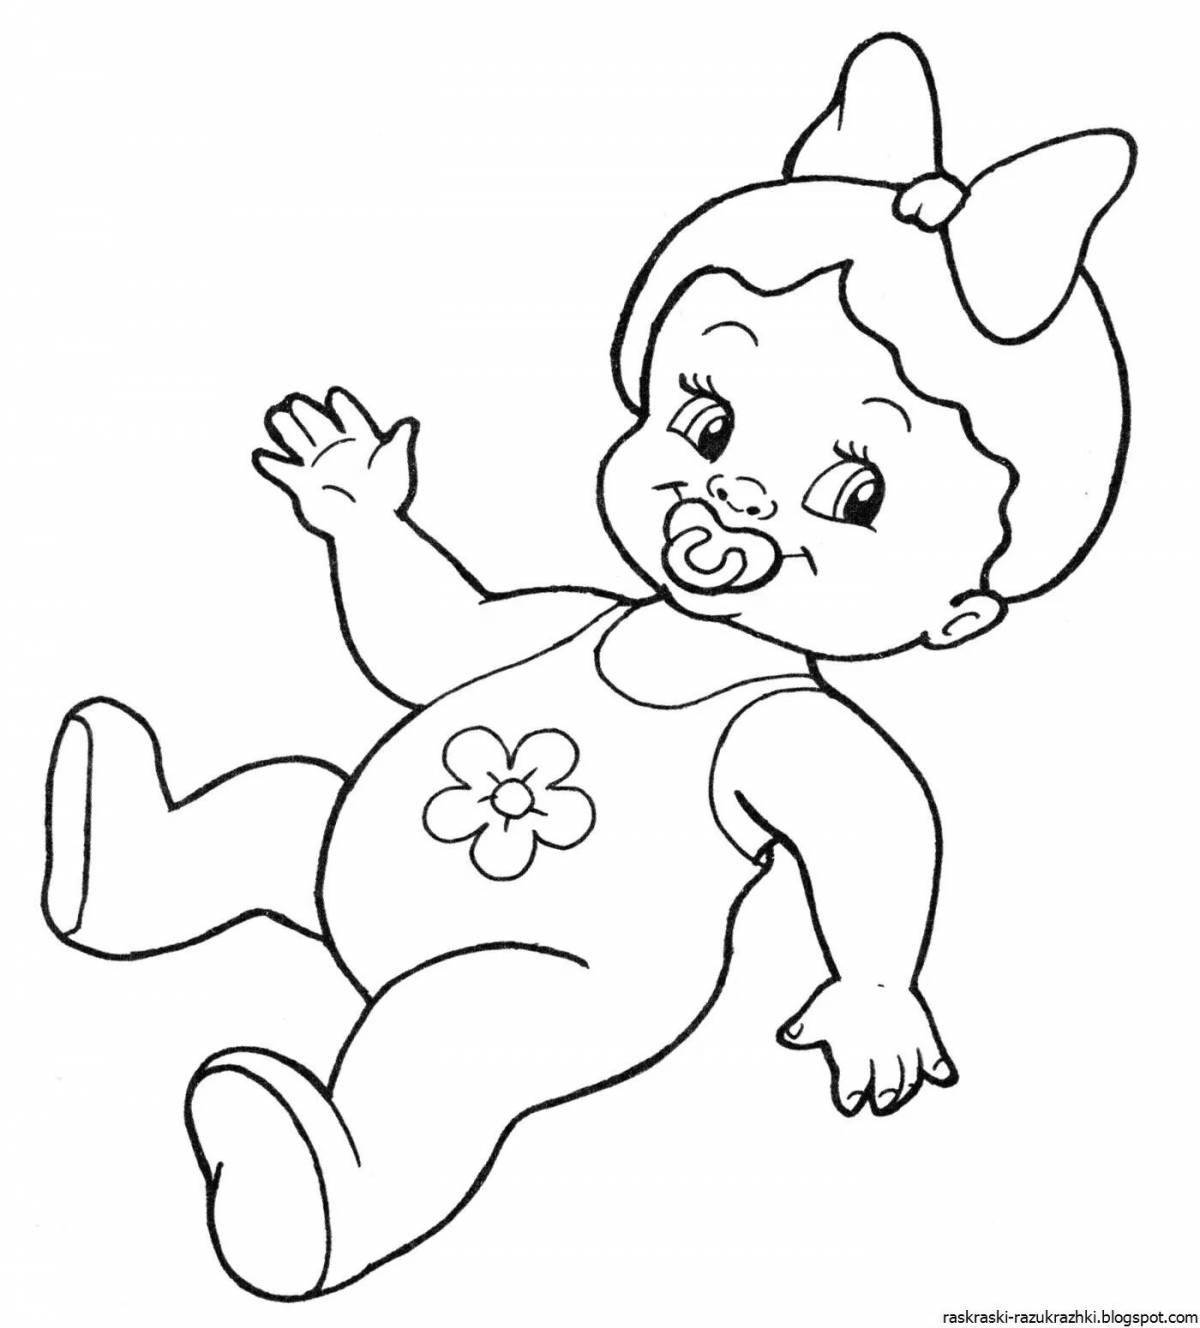 Radiant coloring page girls dolls